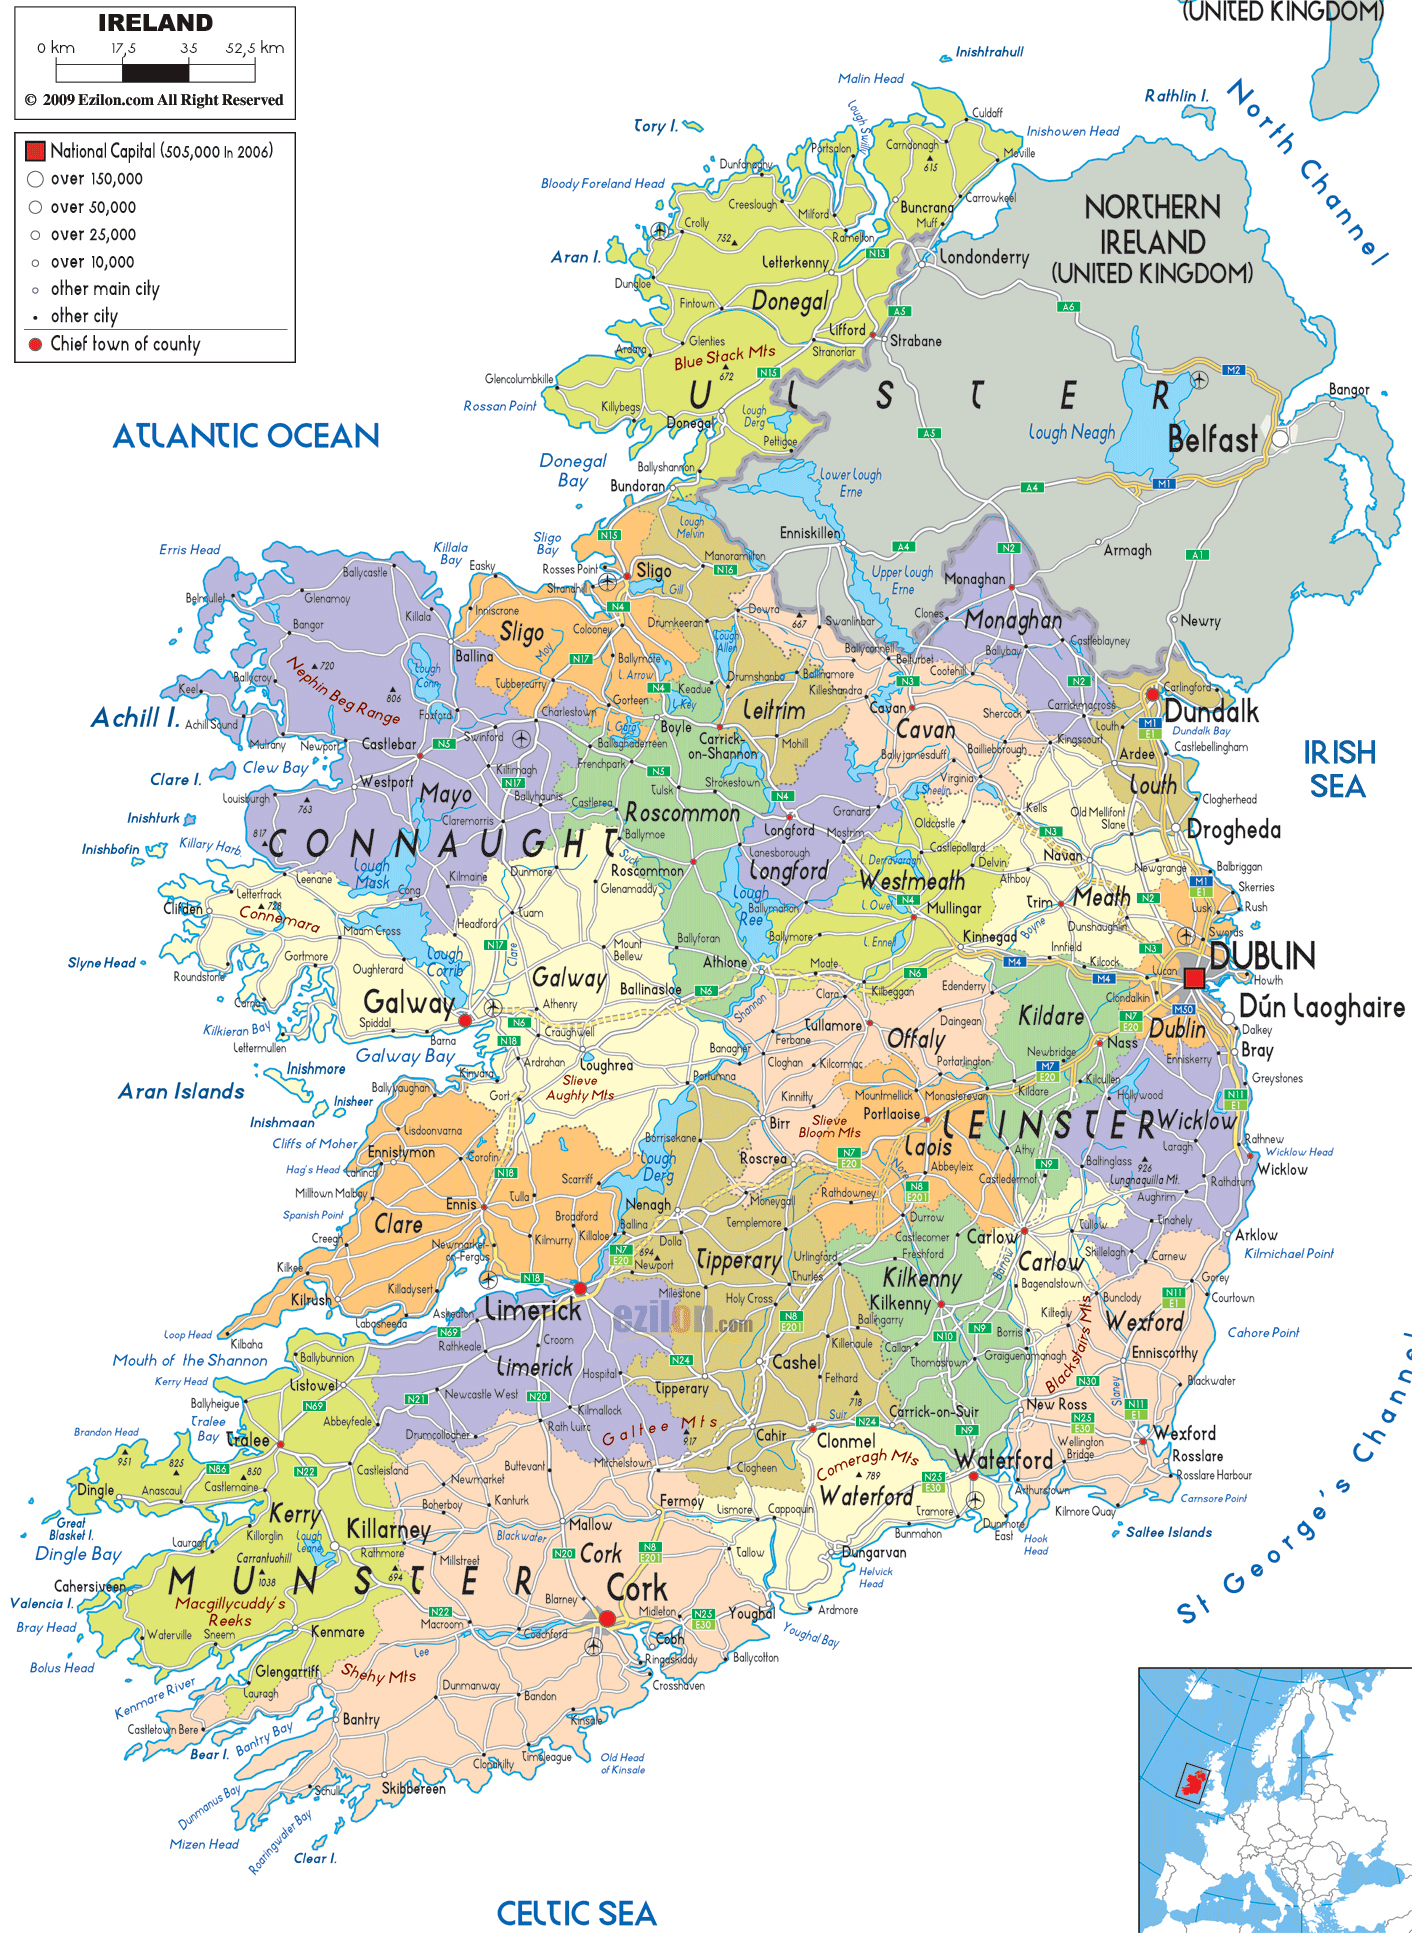 Large Detailed Political And Administrative Map Of Ireland With All Cities Roads And Airports For Free 